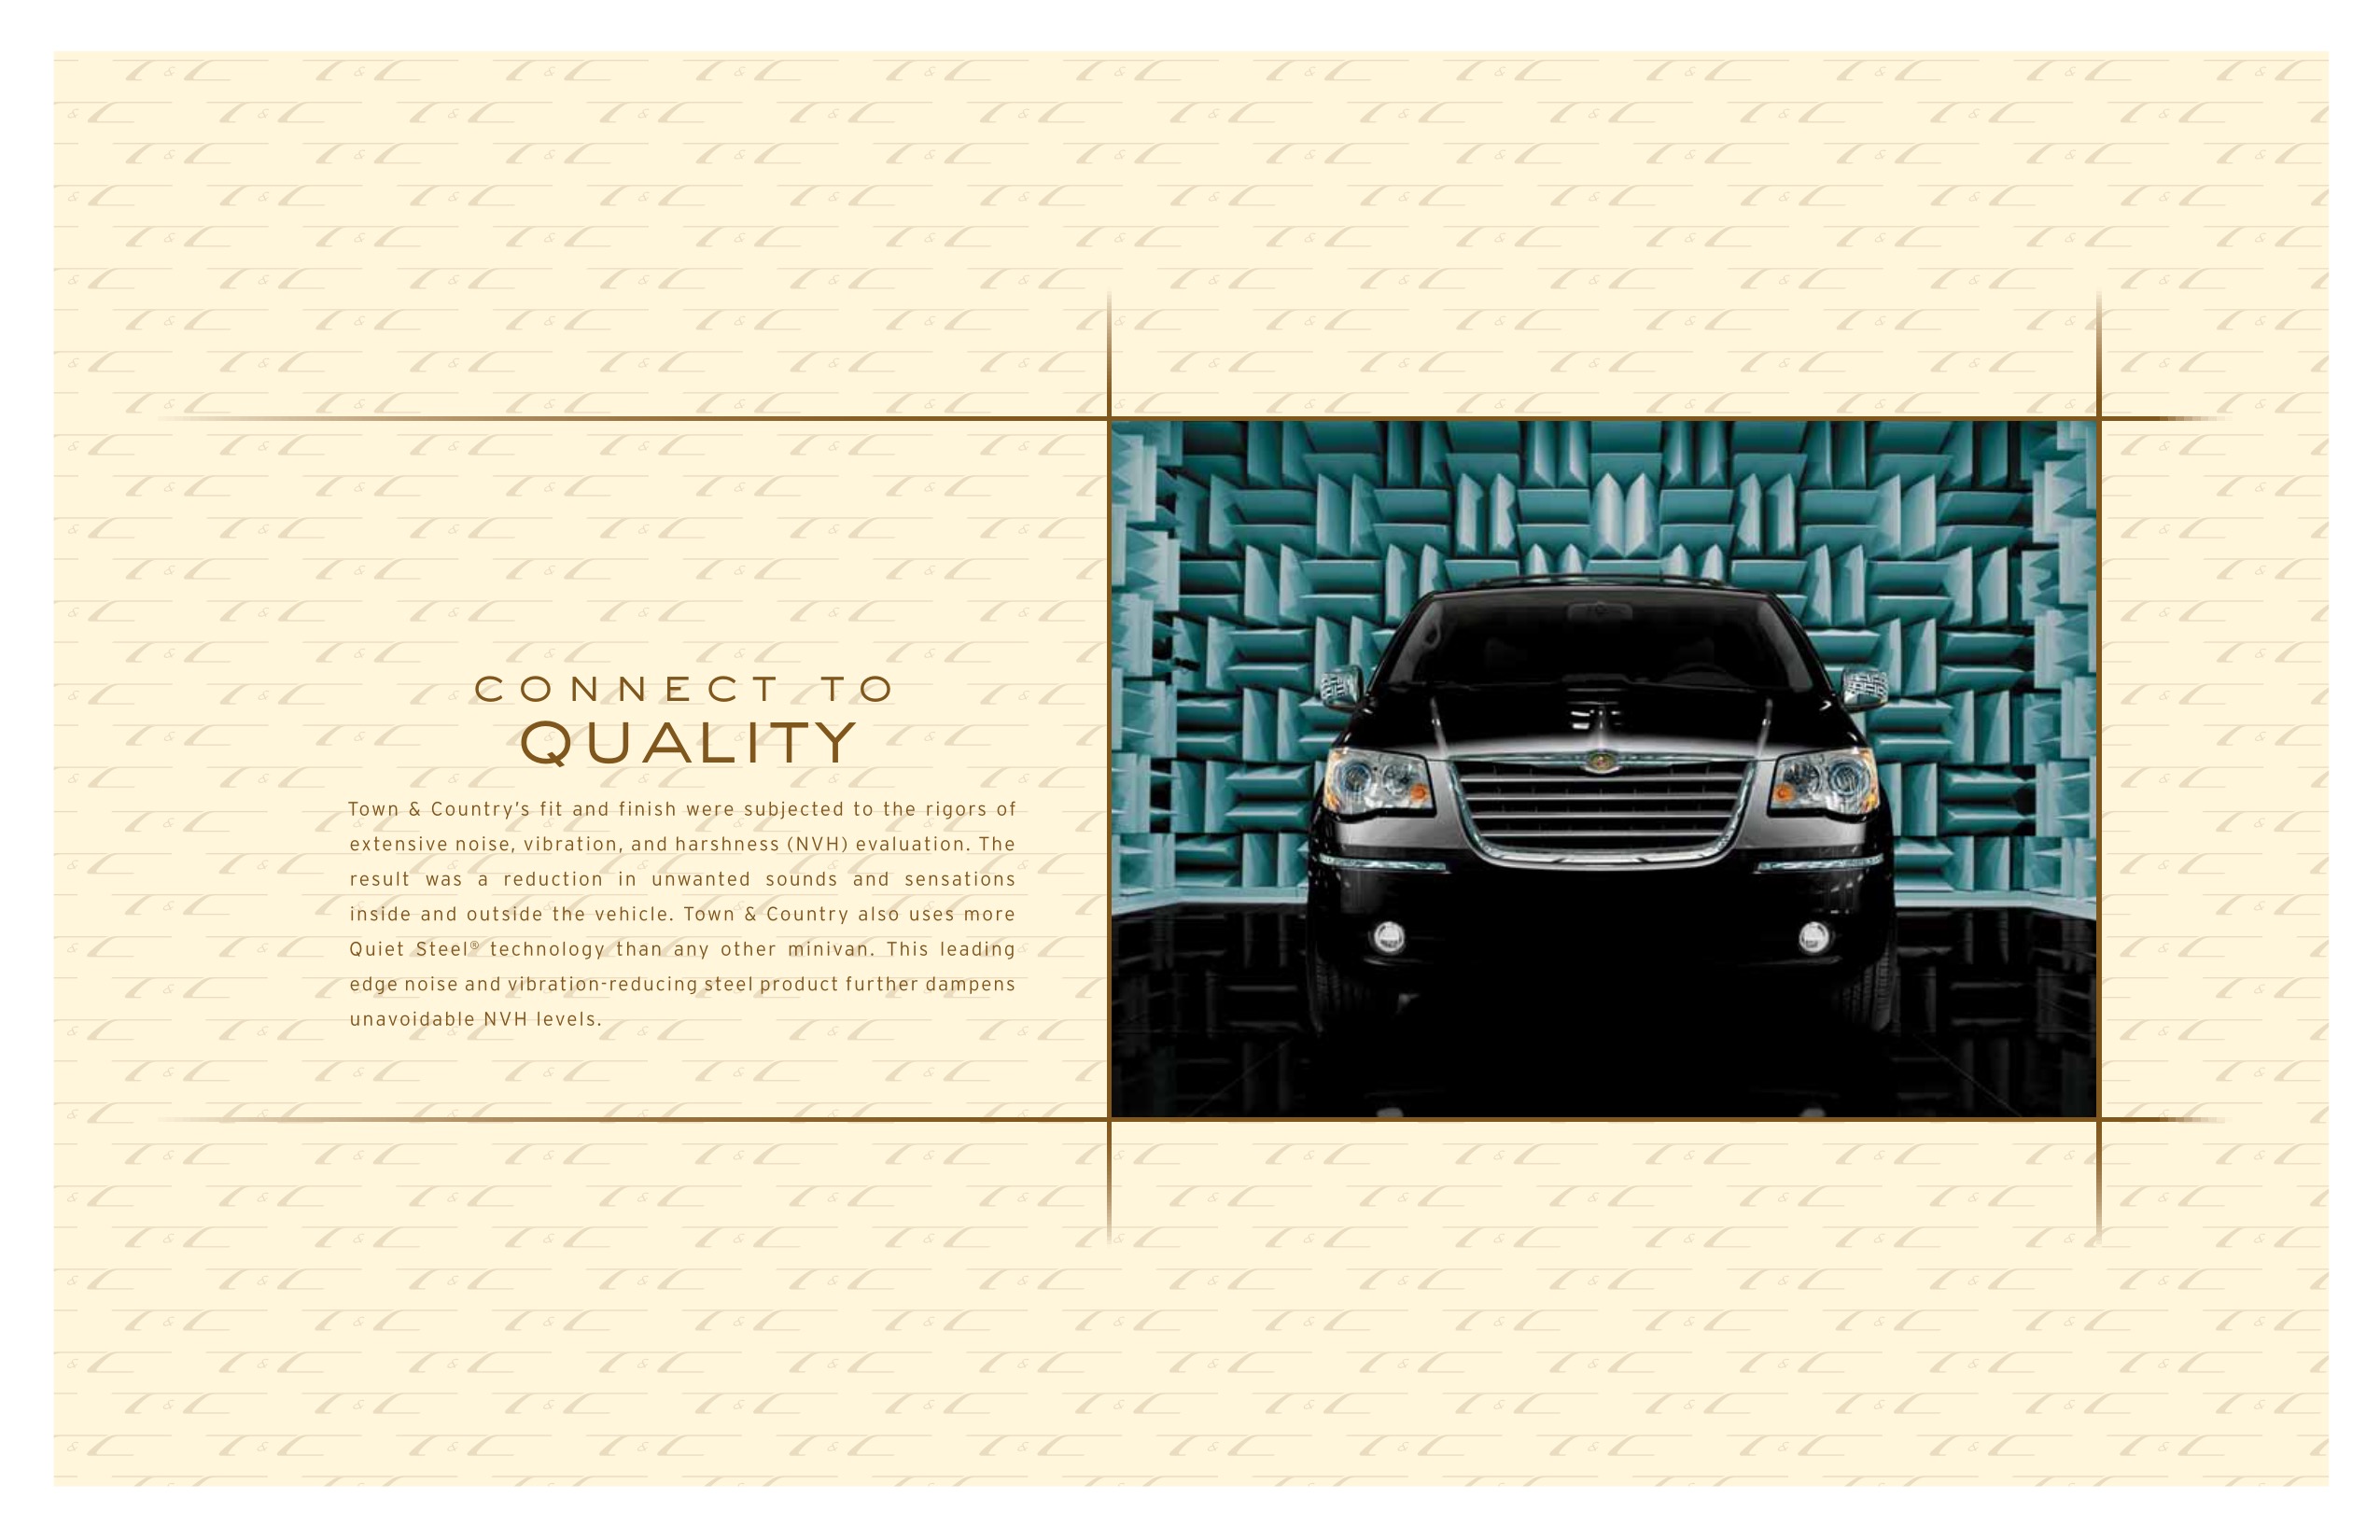 2010 Chrysler Town & Country Brochure Page 17